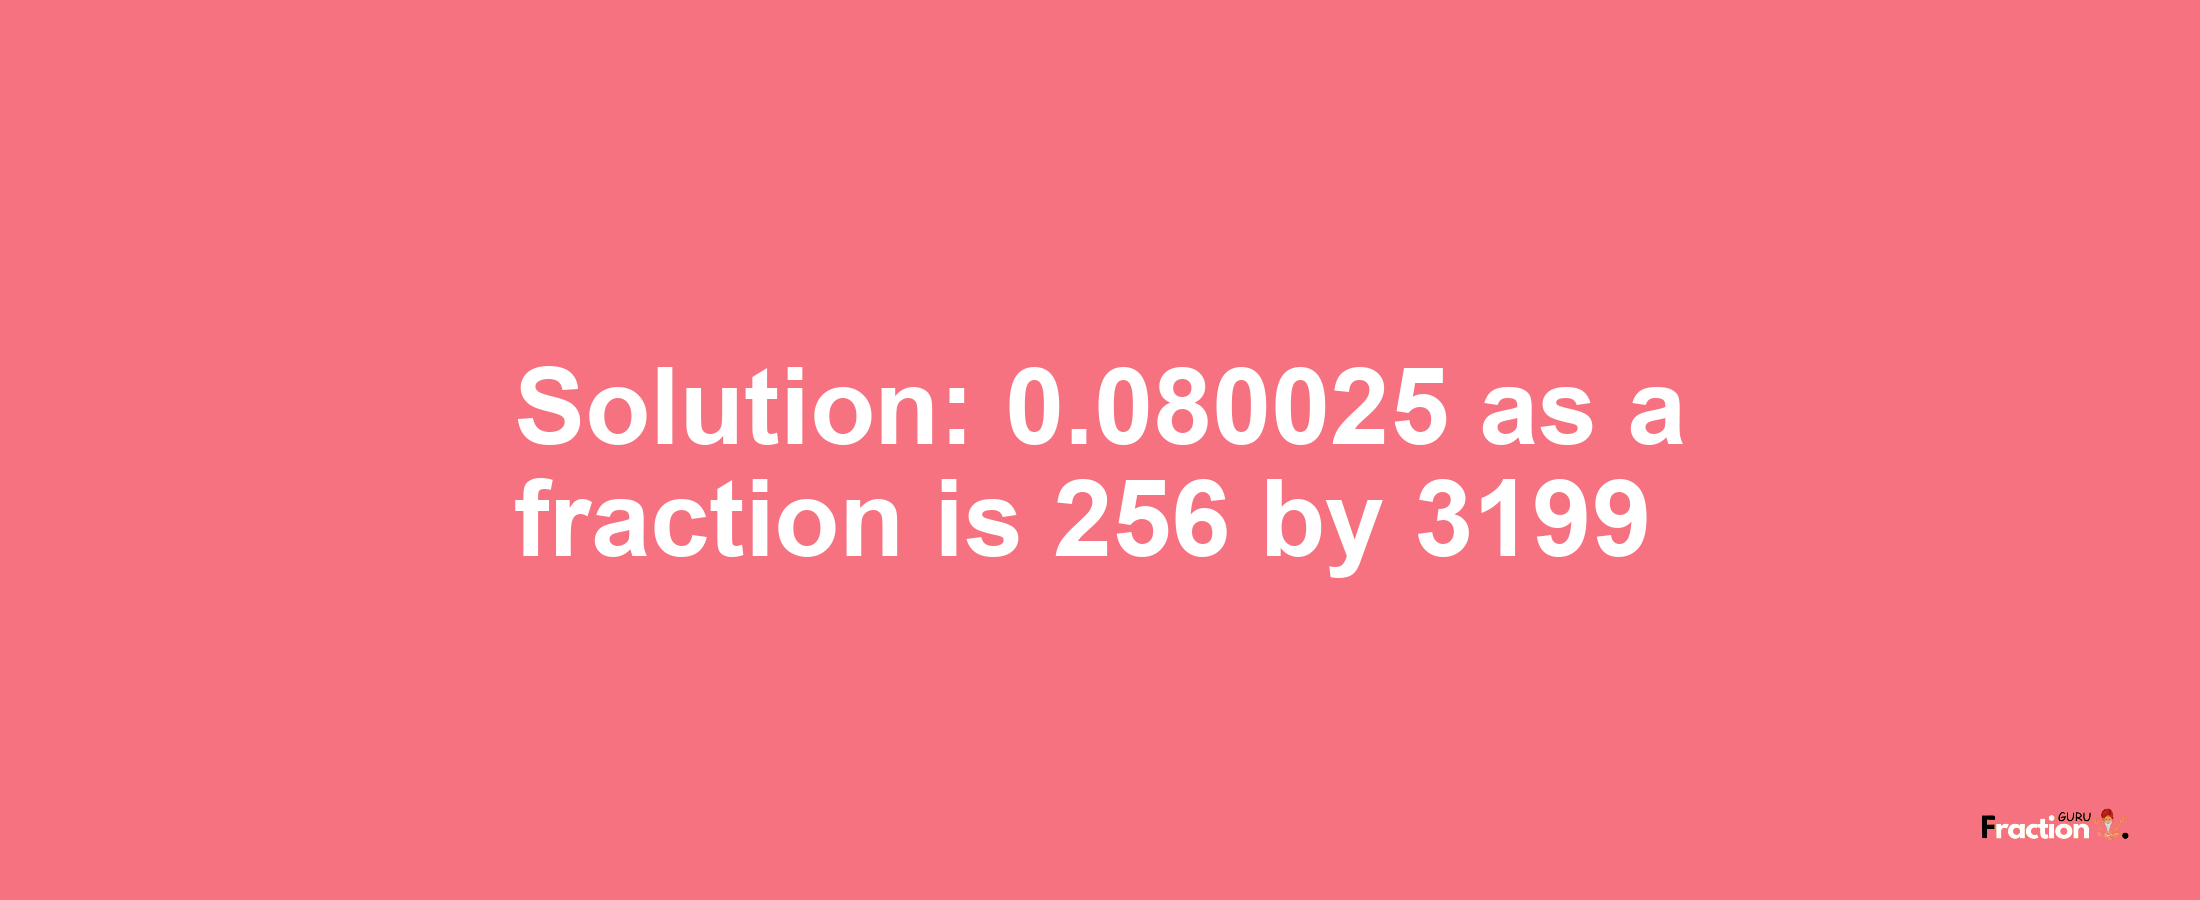 Solution:0.080025 as a fraction is 256/3199